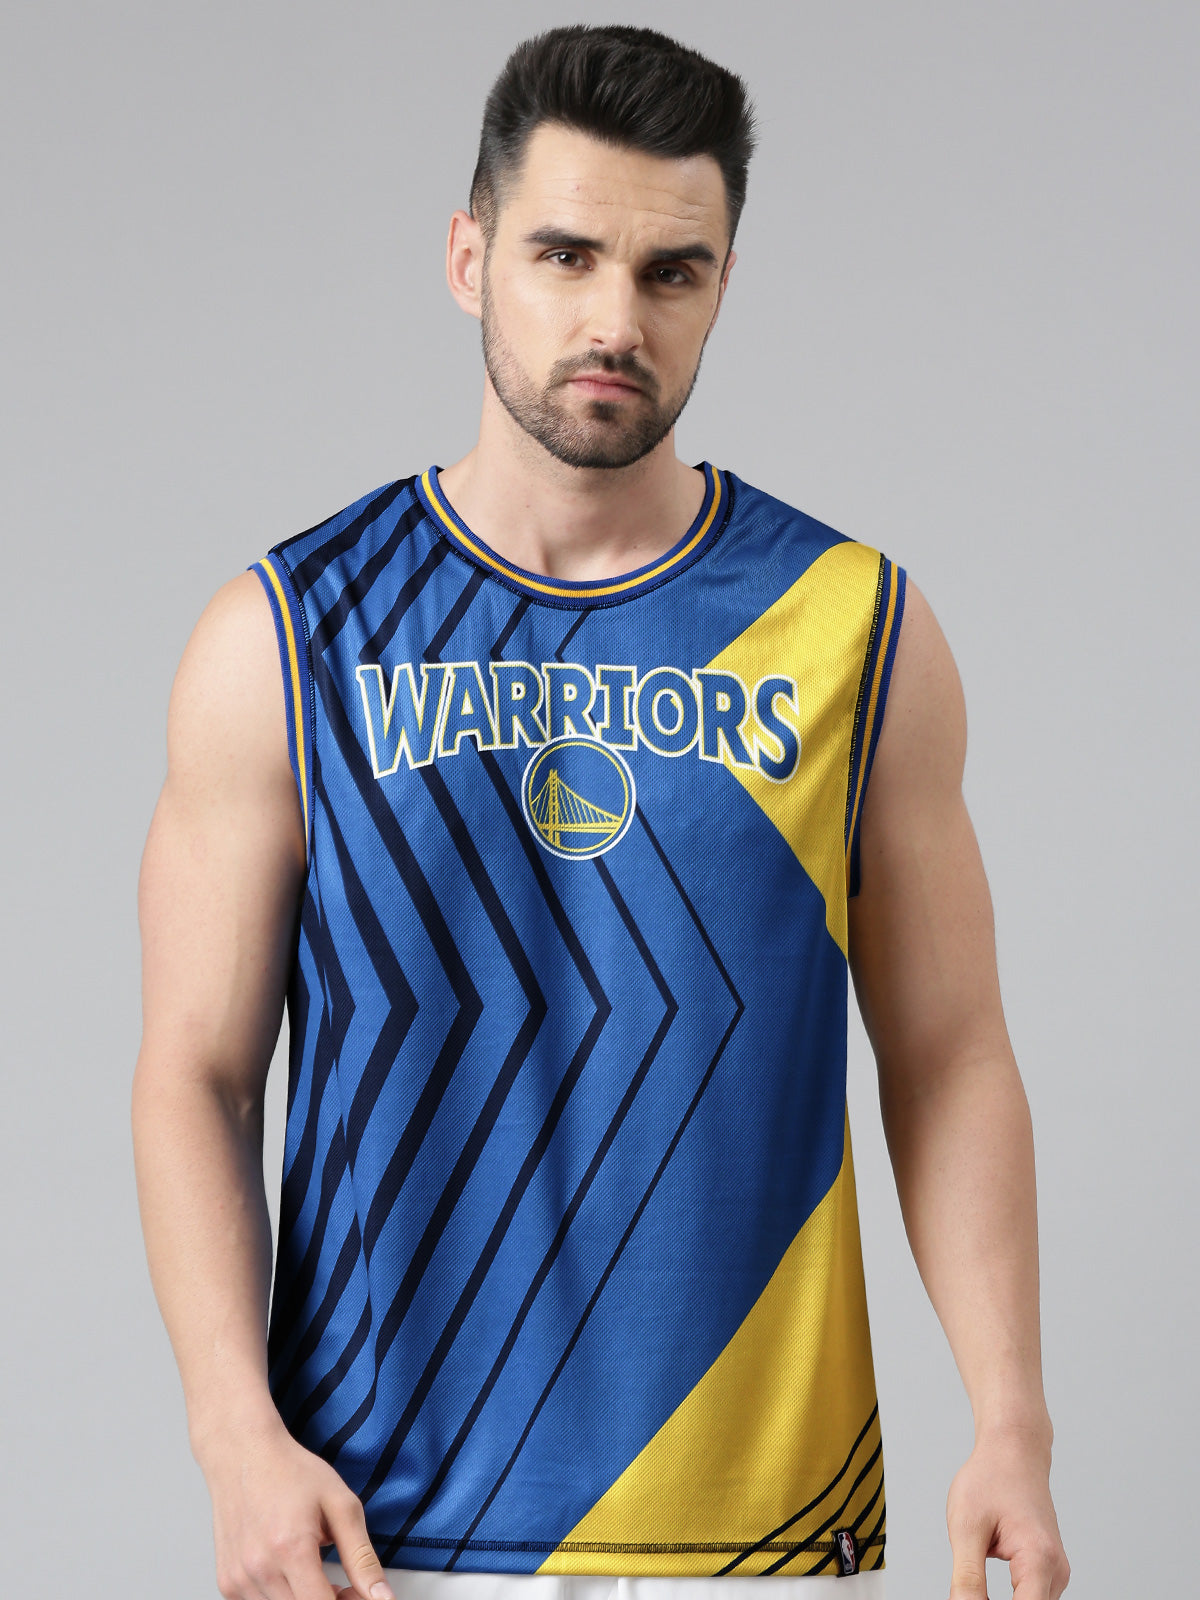 Shop Jersey For Men Basketball Curry Black Gsw For 13 Yearold with